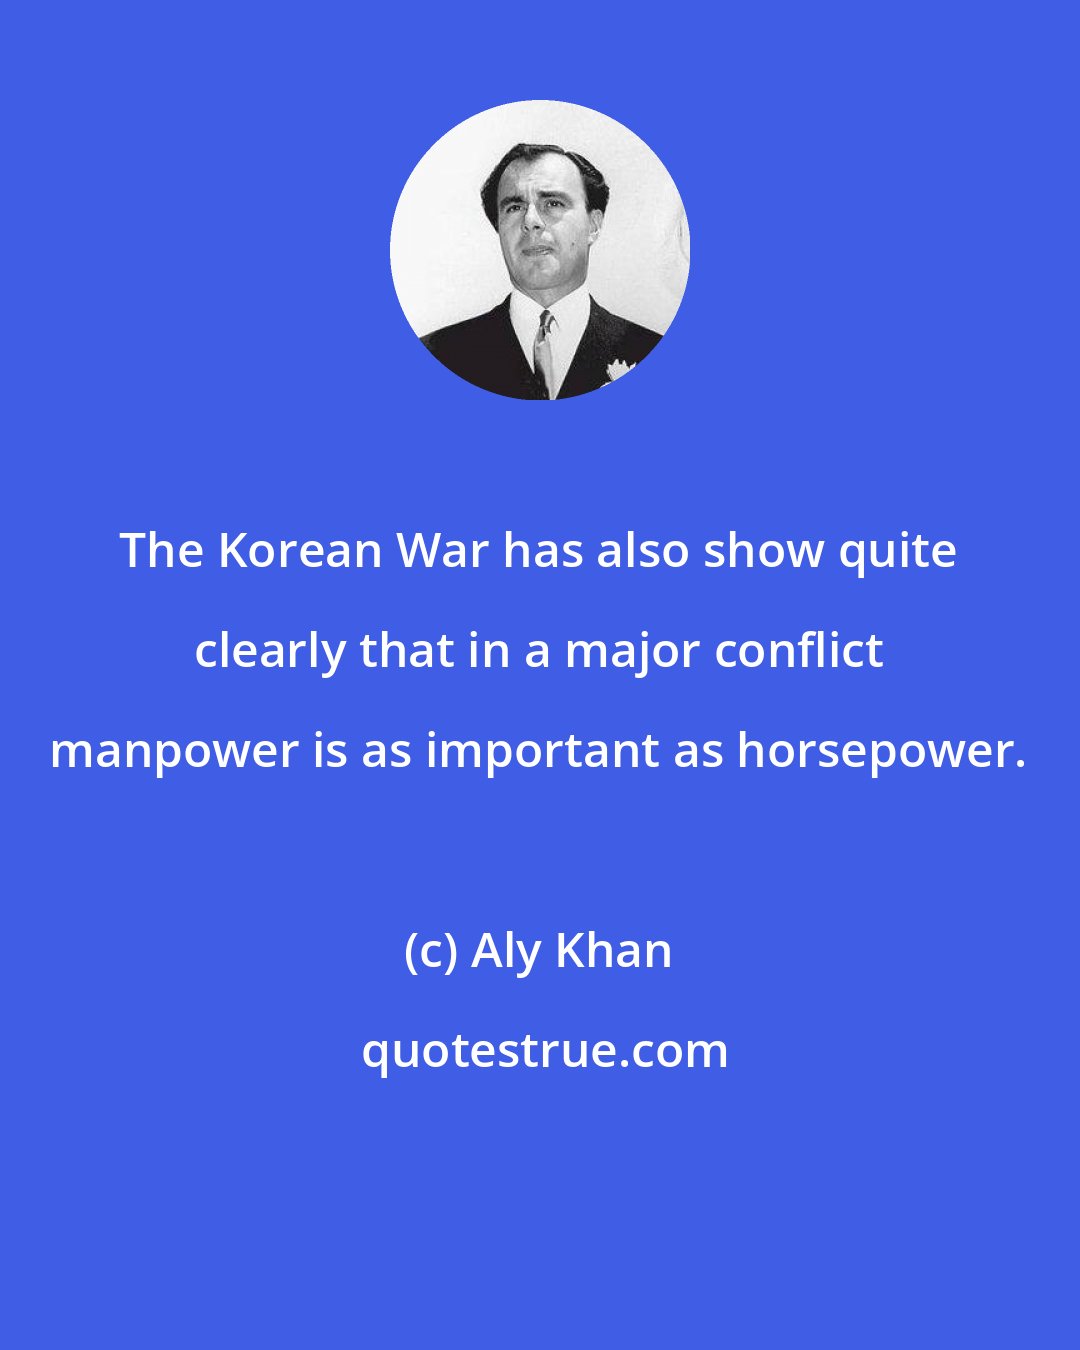 Aly Khan: The Korean War has also show quite clearly that in a major conflict manpower is as important as horsepower.